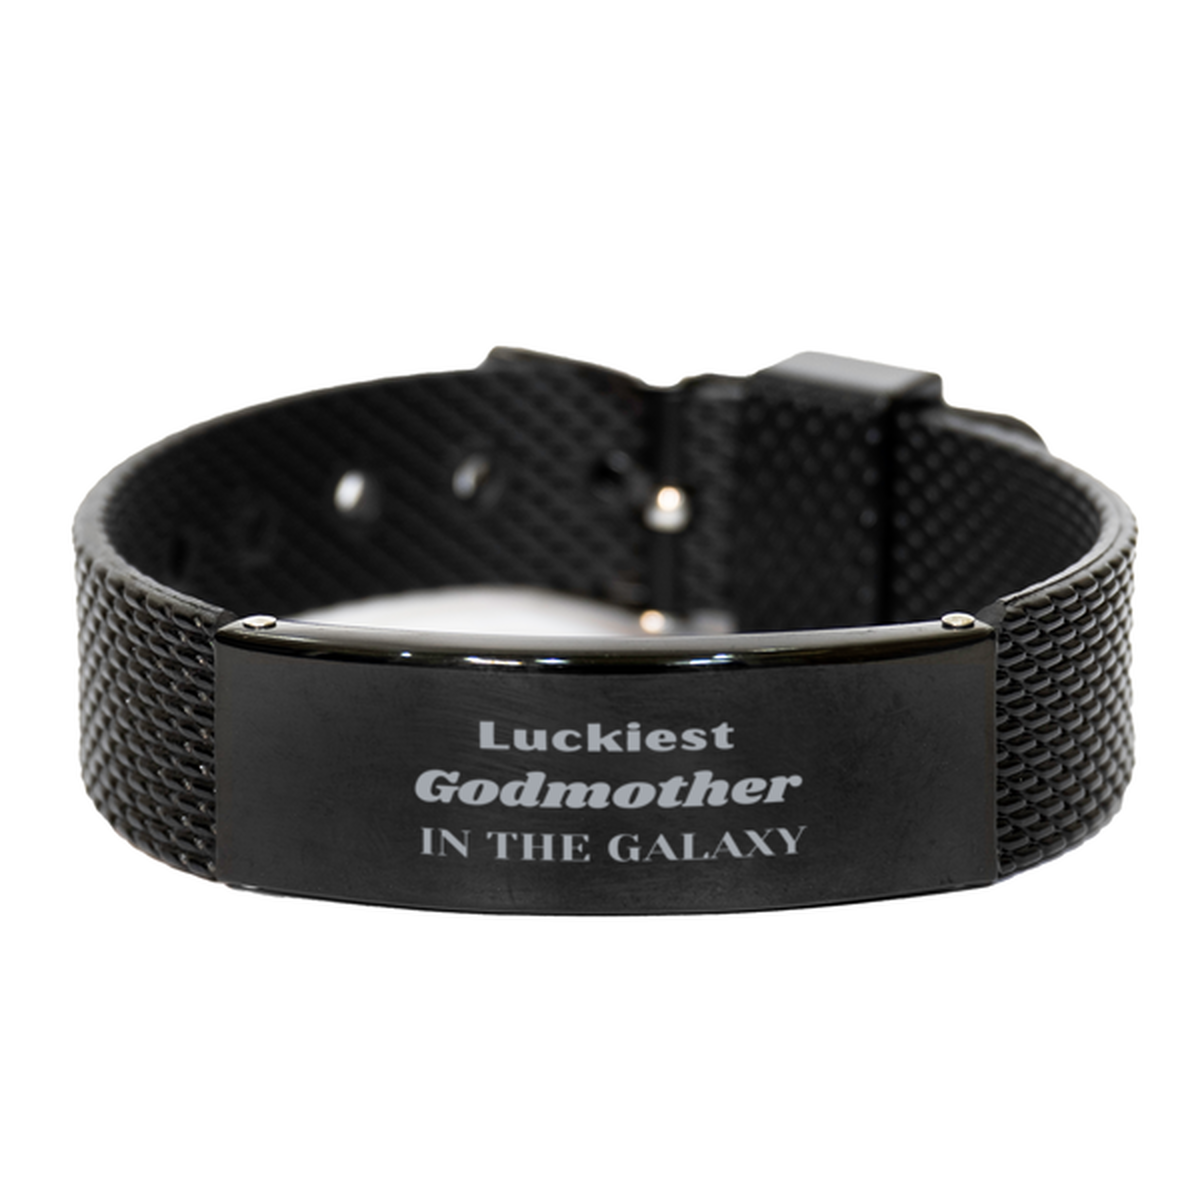 Luckiest Godmother in the Galaxy, To My Godmother Engraved Gifts, Christmas Godmother Black Shark Mesh Bracelet Gifts, X-mas Birthday Unique Gifts For Godmother Men Women